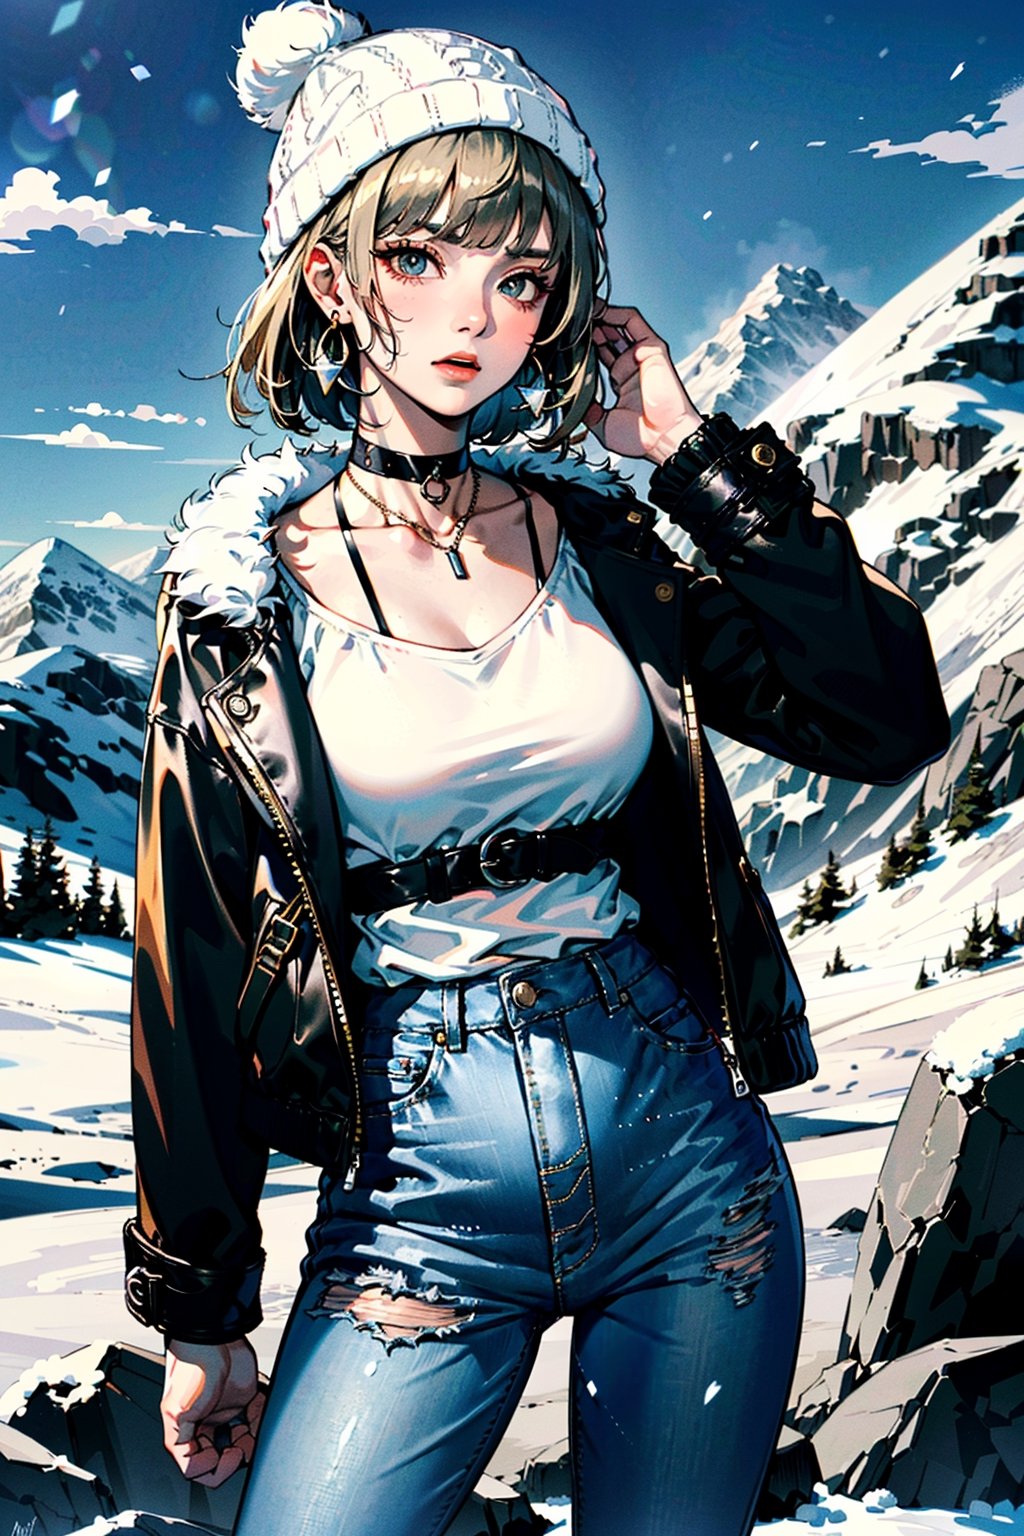 (best quality, masterpiece:1.1),   cowboy shot,     (1female), confused face, golden hair, absurdly short hair, blunt bangs,        bar earrings, black faux fur jacket, distressed boyfriend jeans, white ankle boots, black beanie hat, silver choker necklace, ( snowy mountaintop, winter clothes, standing on a rock),
